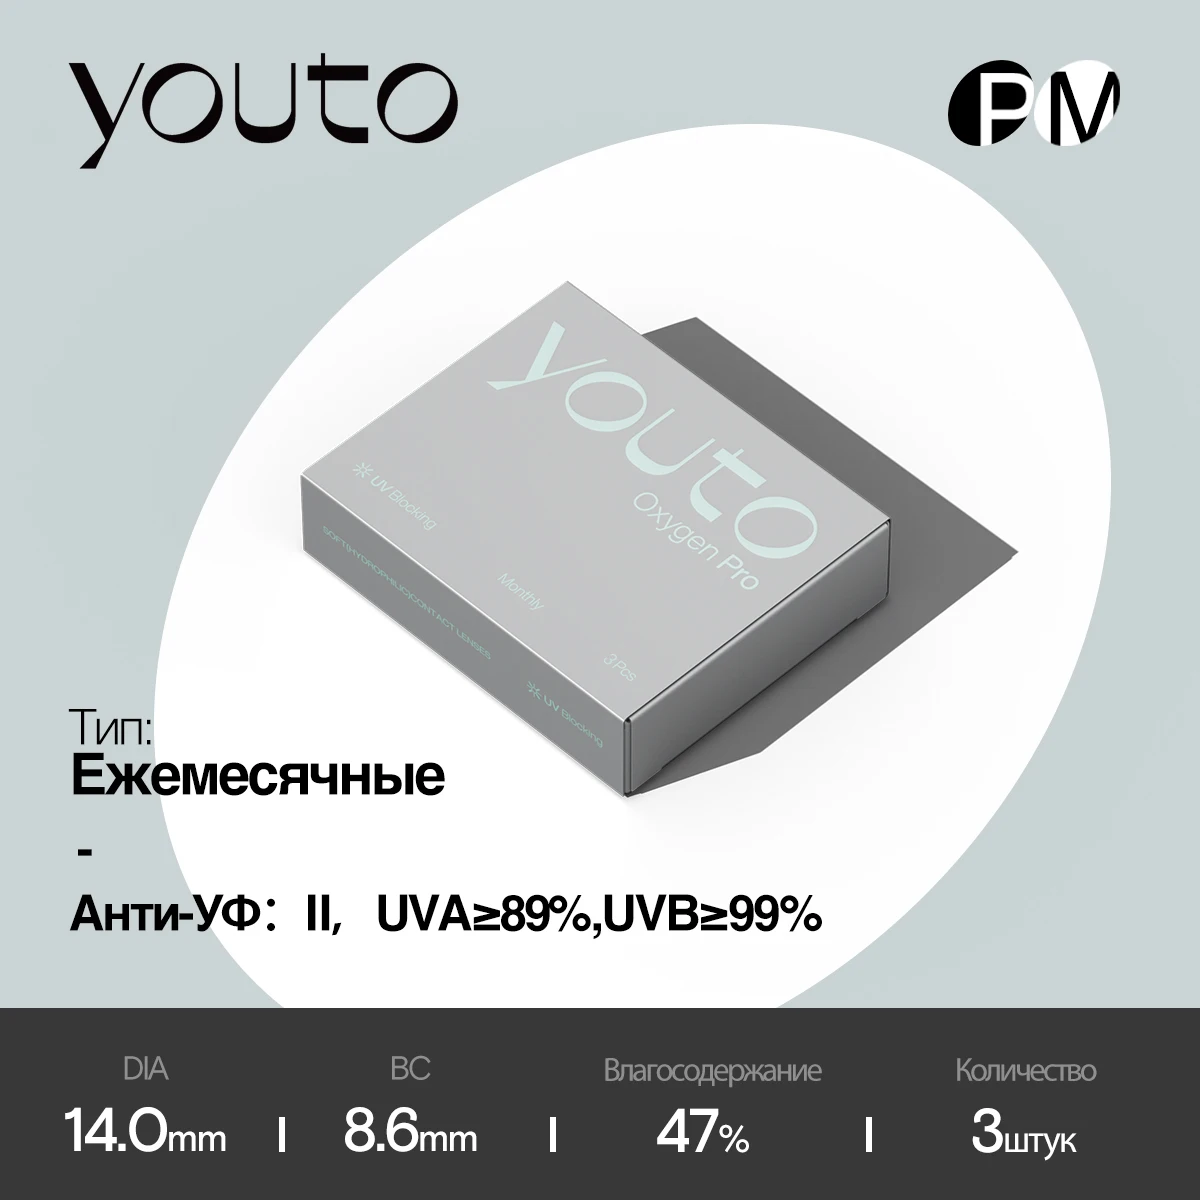 

Youto Oxygen Monthly Soft Contact Lenses, BC 8.6 mm, DIA 14.0 mm, 47% Moisture, Contact Lenses With High Oxygen Content